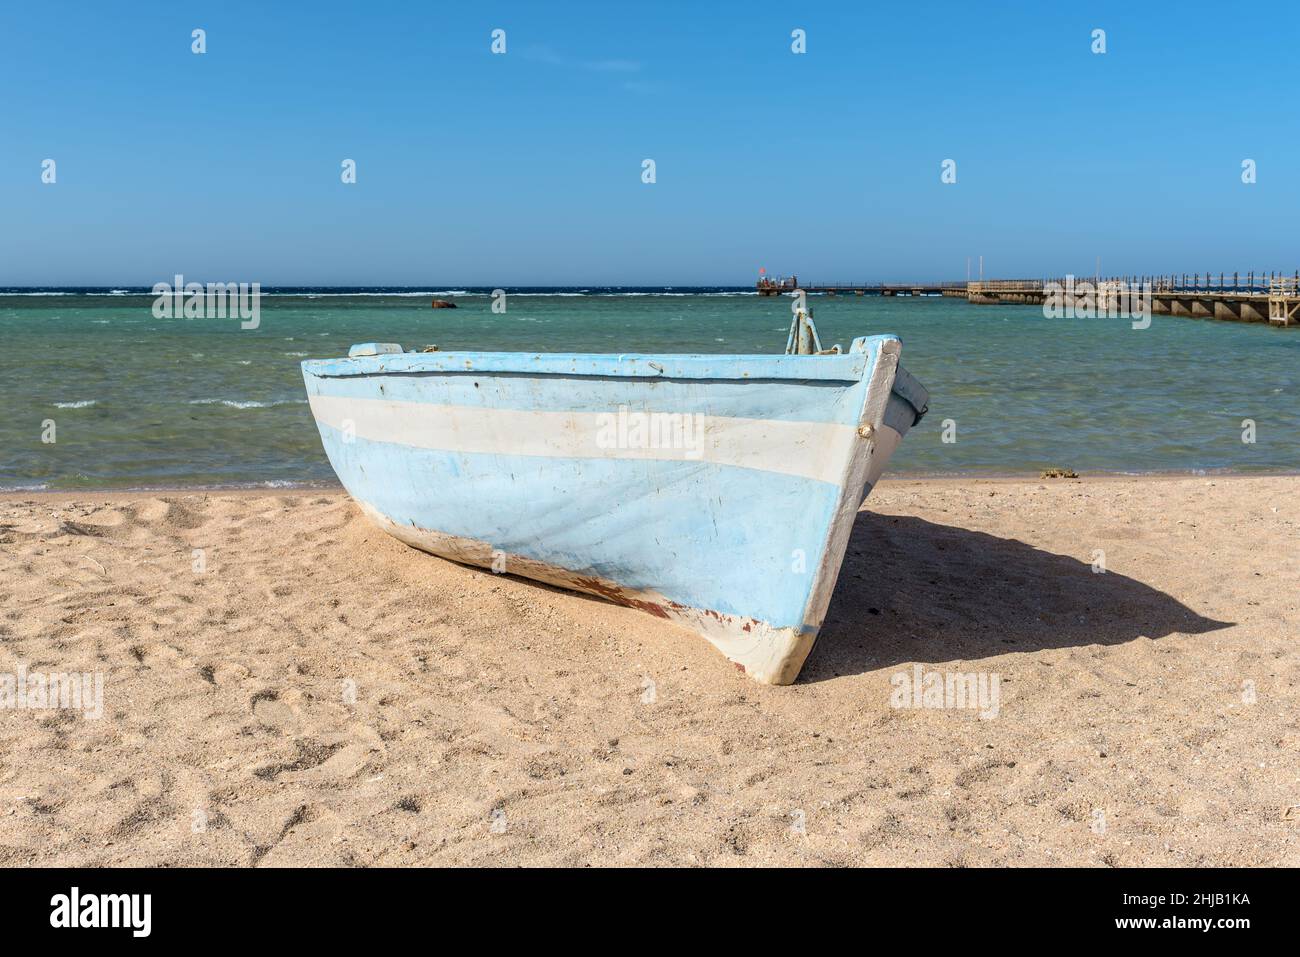 A wooden boat ashore on a beach of the Red Sea, Egypt Stock Photo